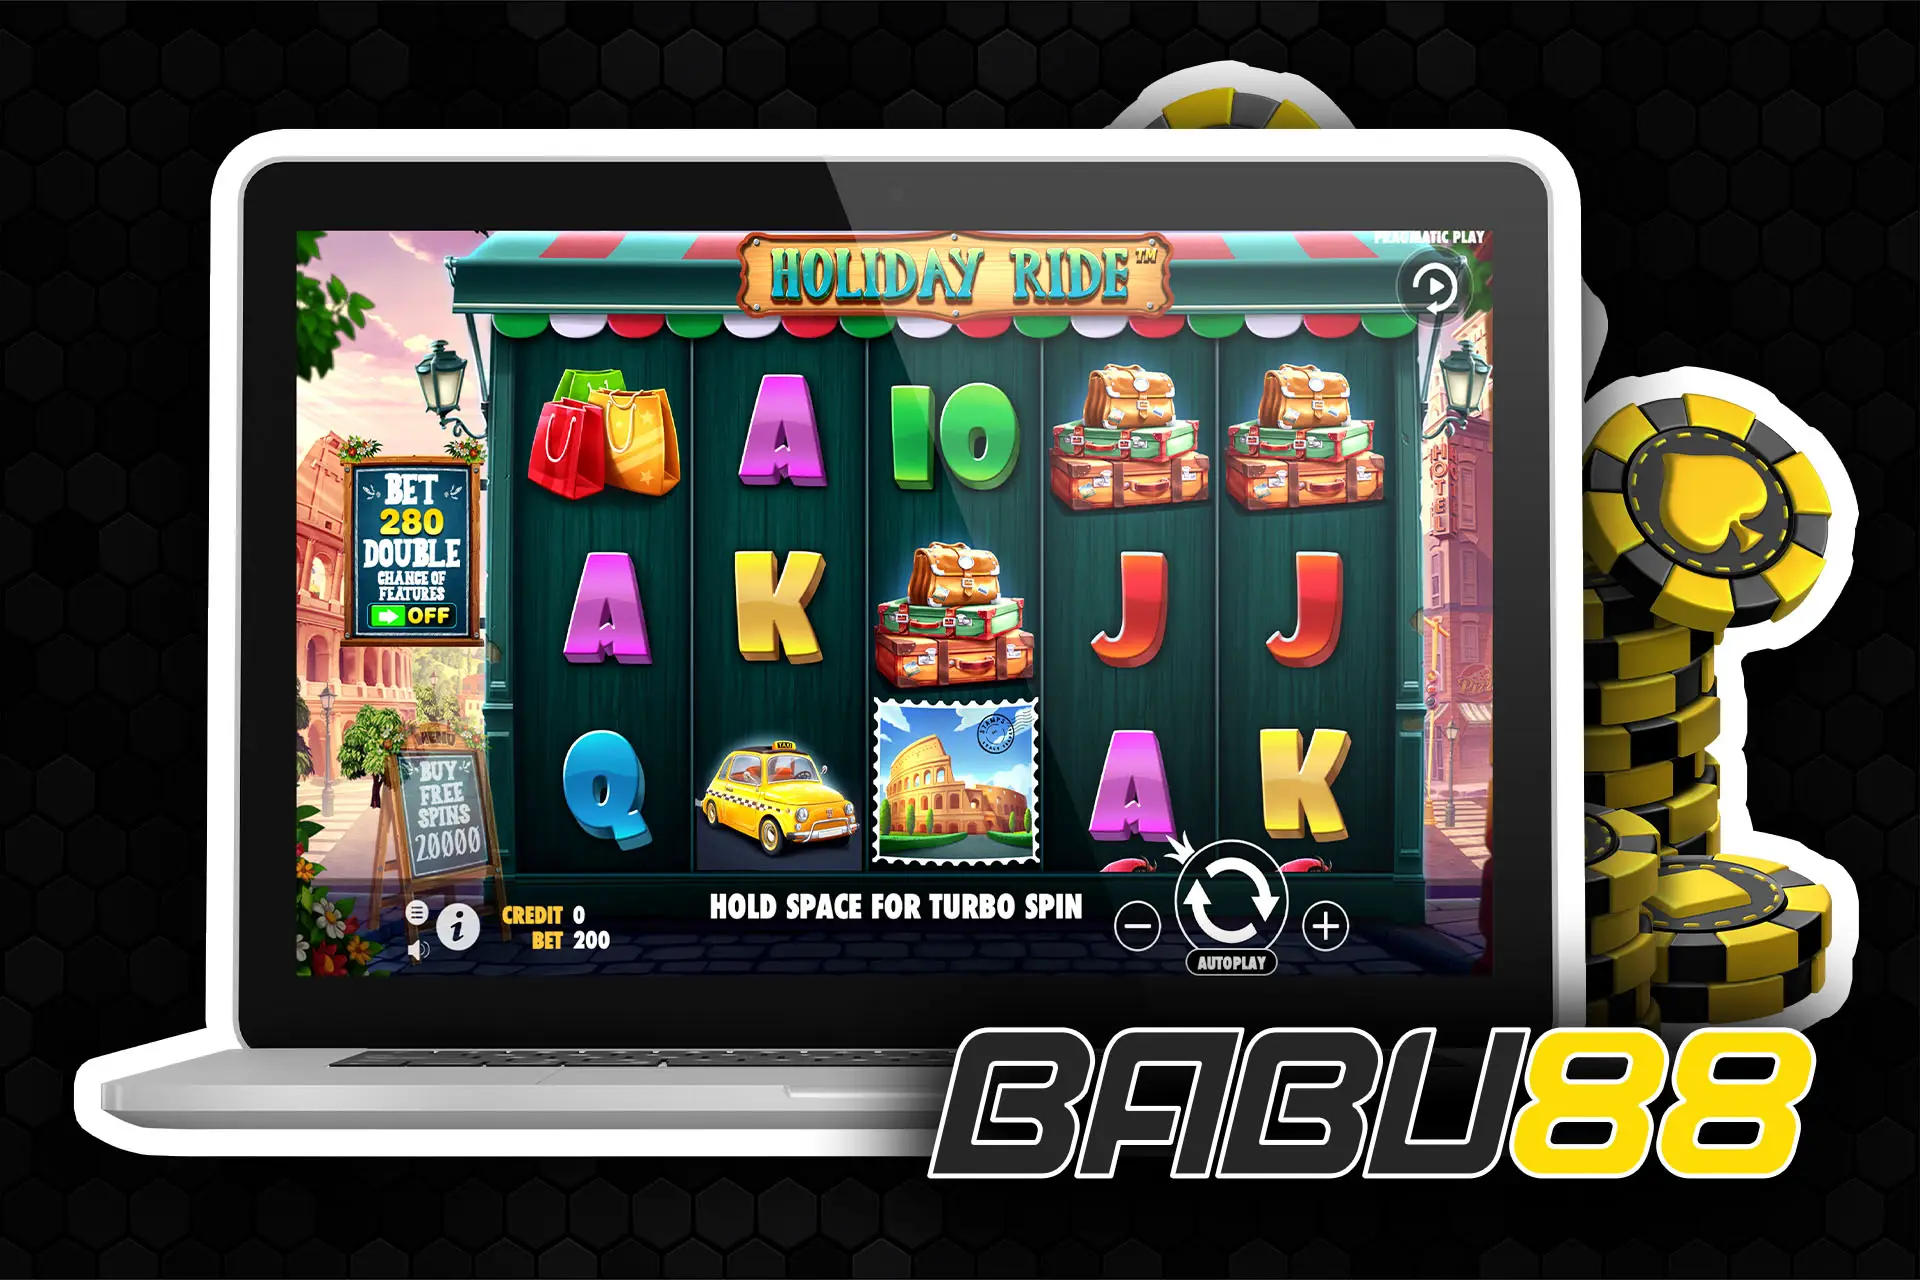 Sign up for Babu88 and play the Holiday Ride slot.